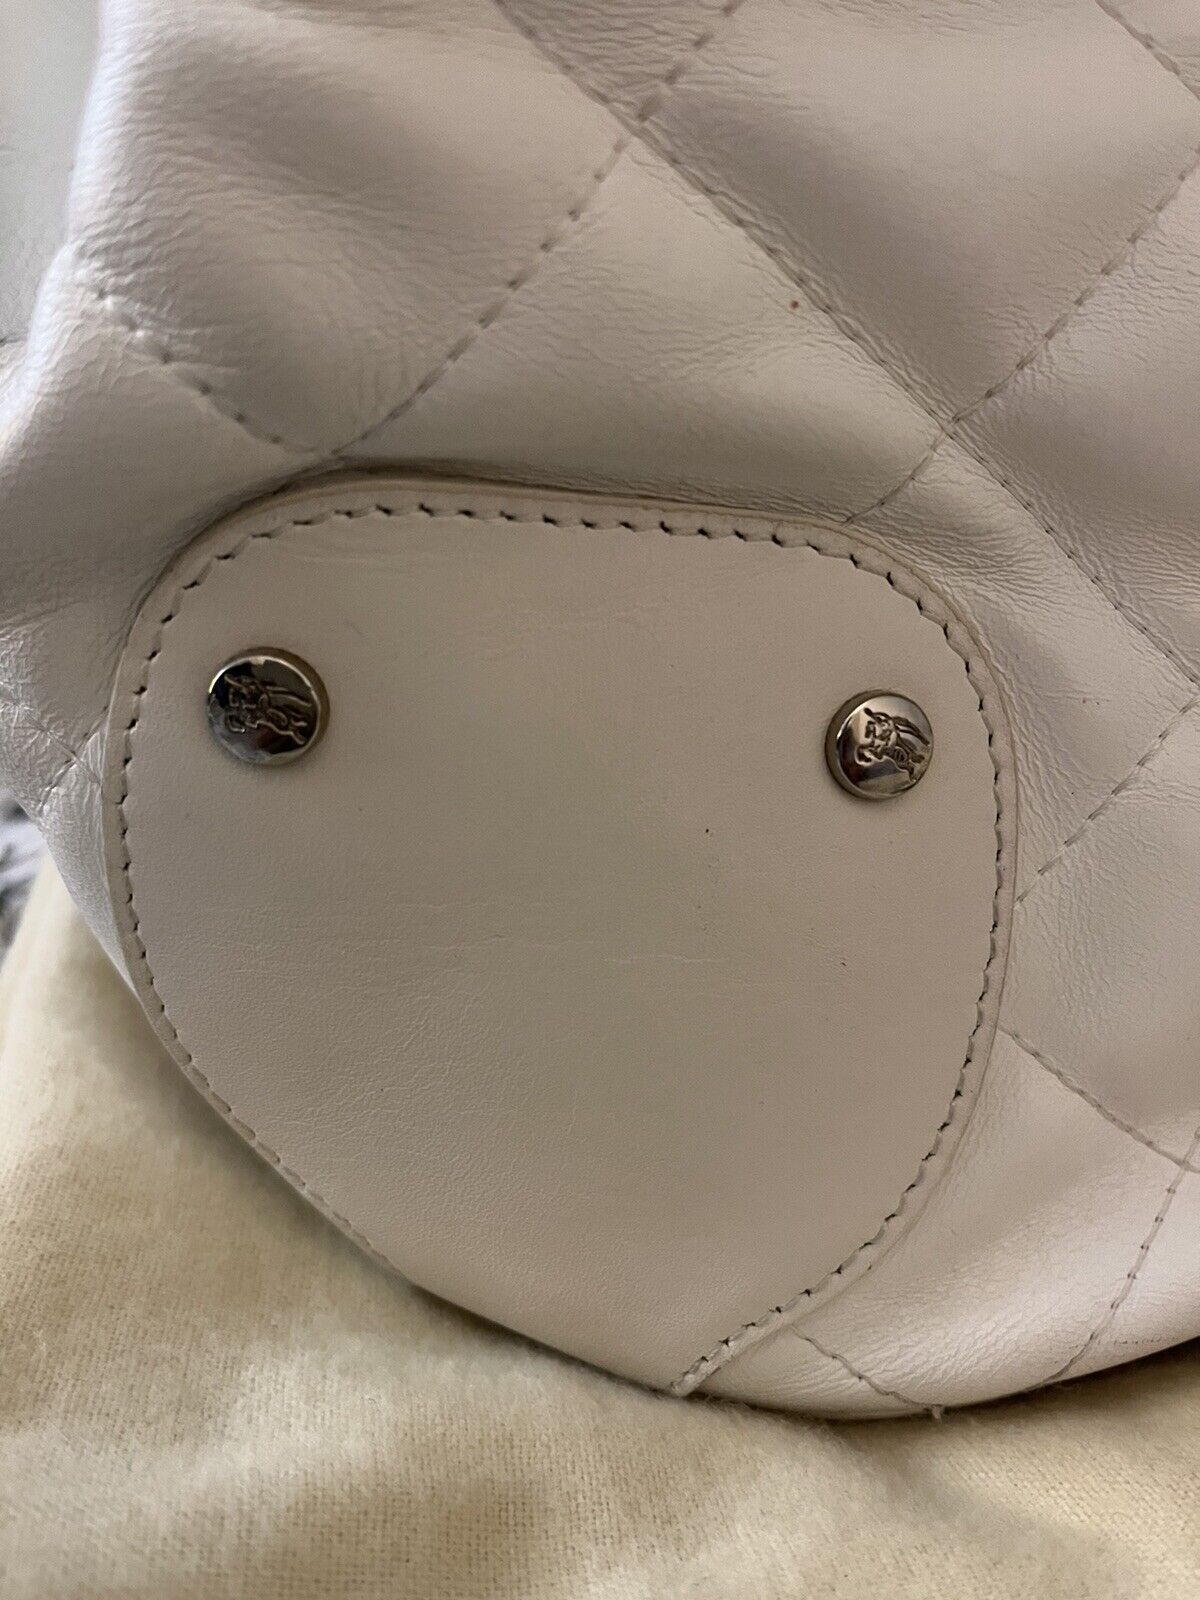 Burberry Quilted Bucket Bag - image 9